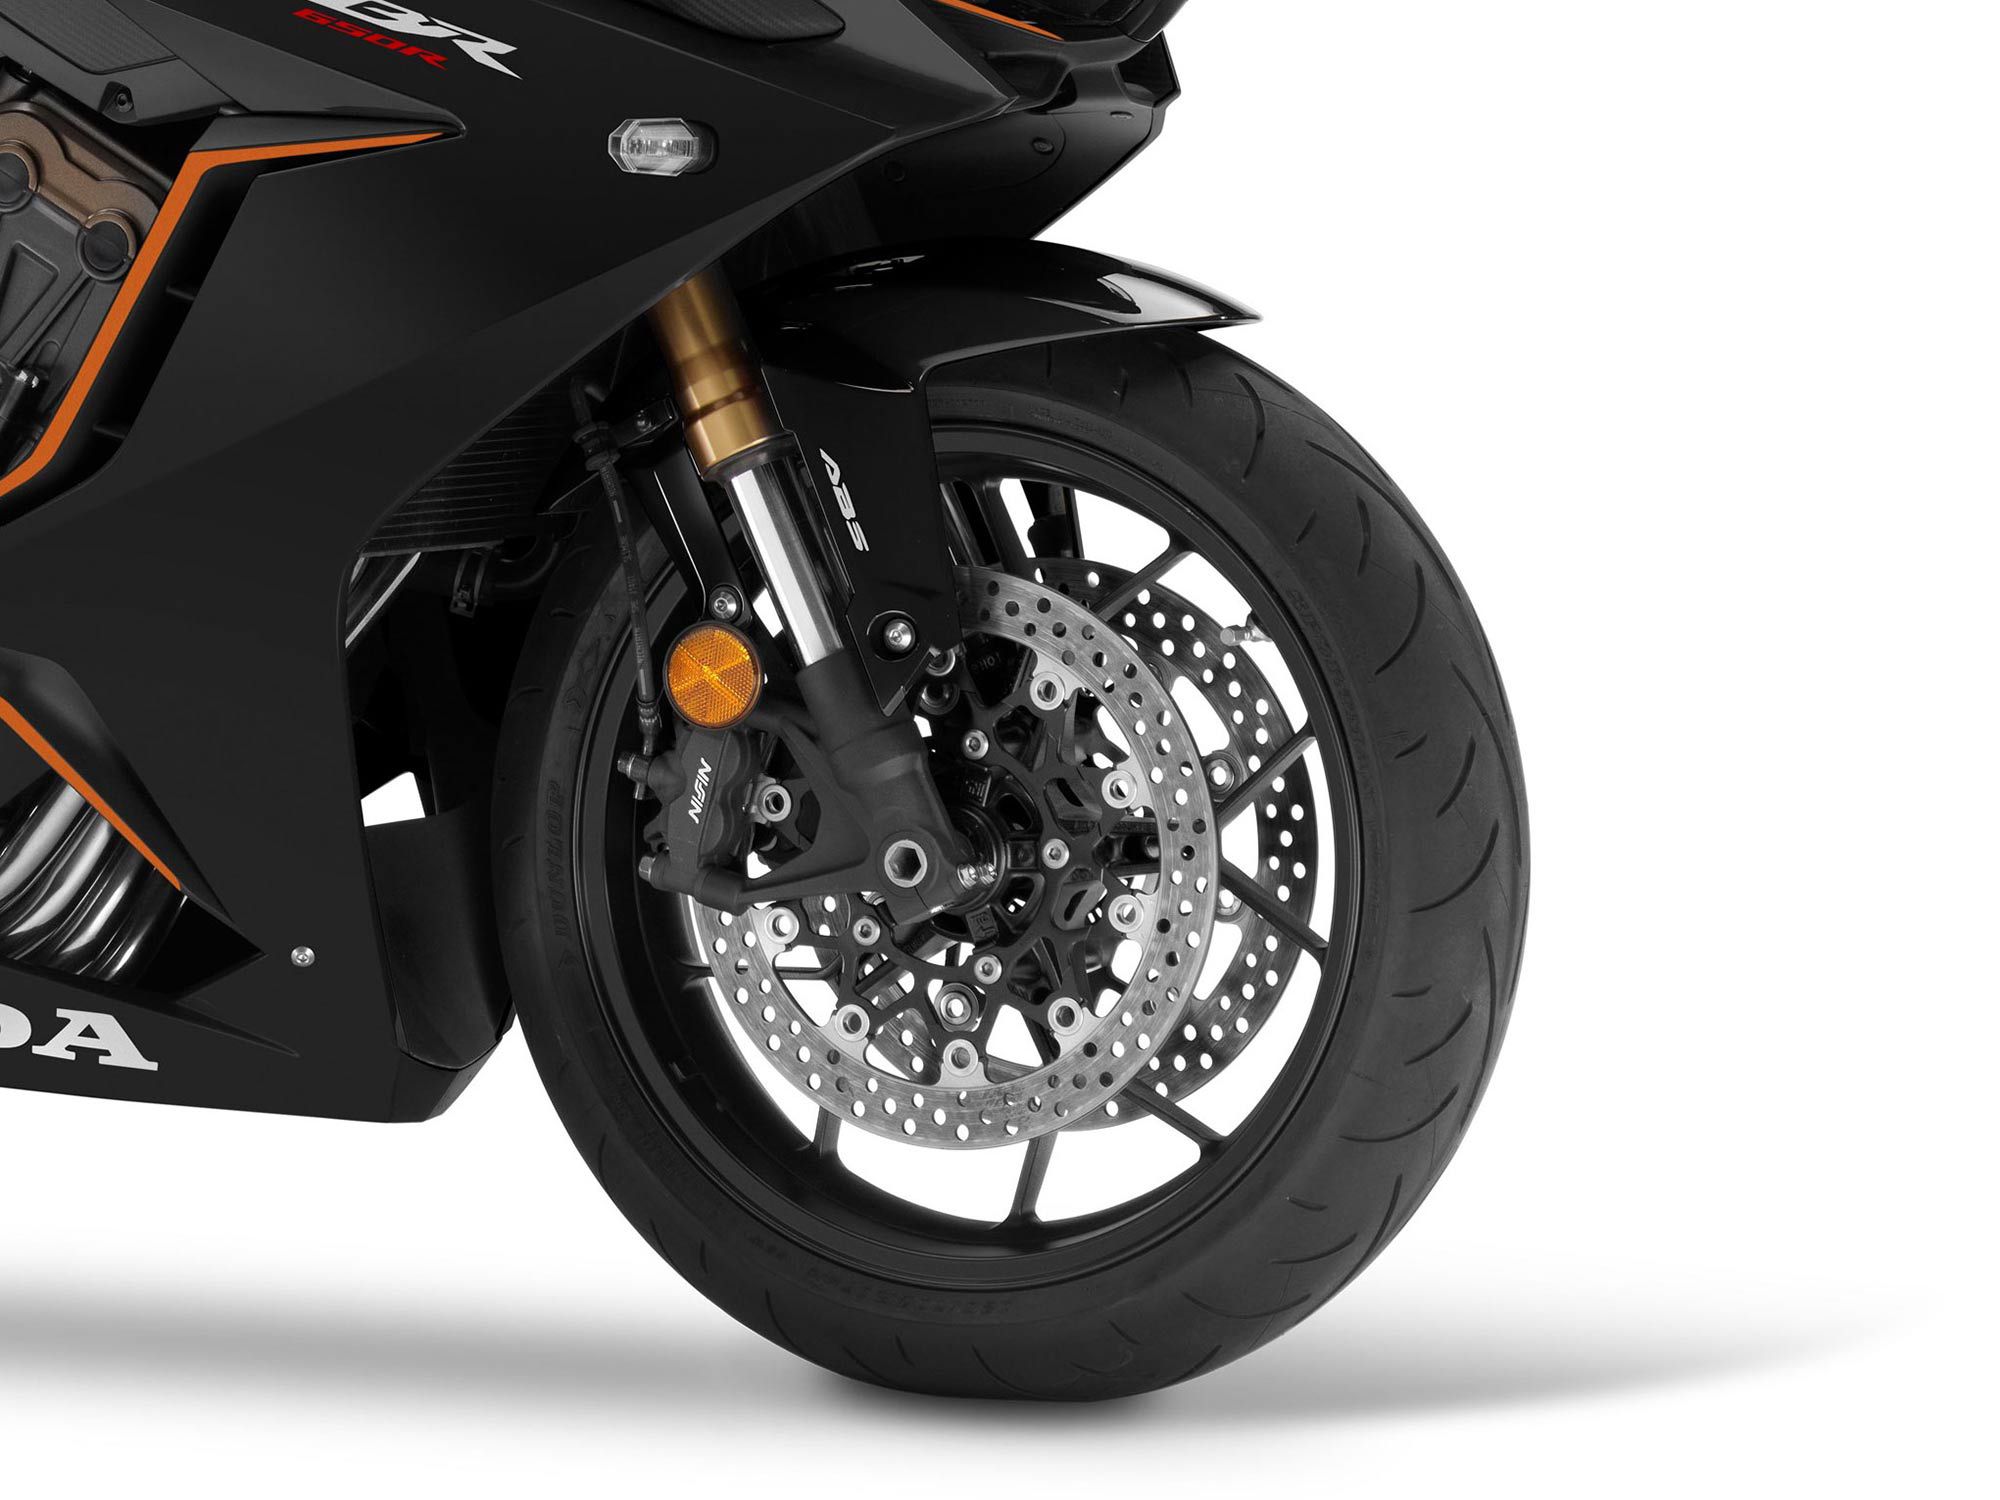 The CBR650R is not meant to be a track-going sportbike (Honda saves that for the CBR600RR), but still offers up decent performance and has a worthwhile spec sheet. Front brakes use radial-mount calipers biting on 310mm floating rotors.